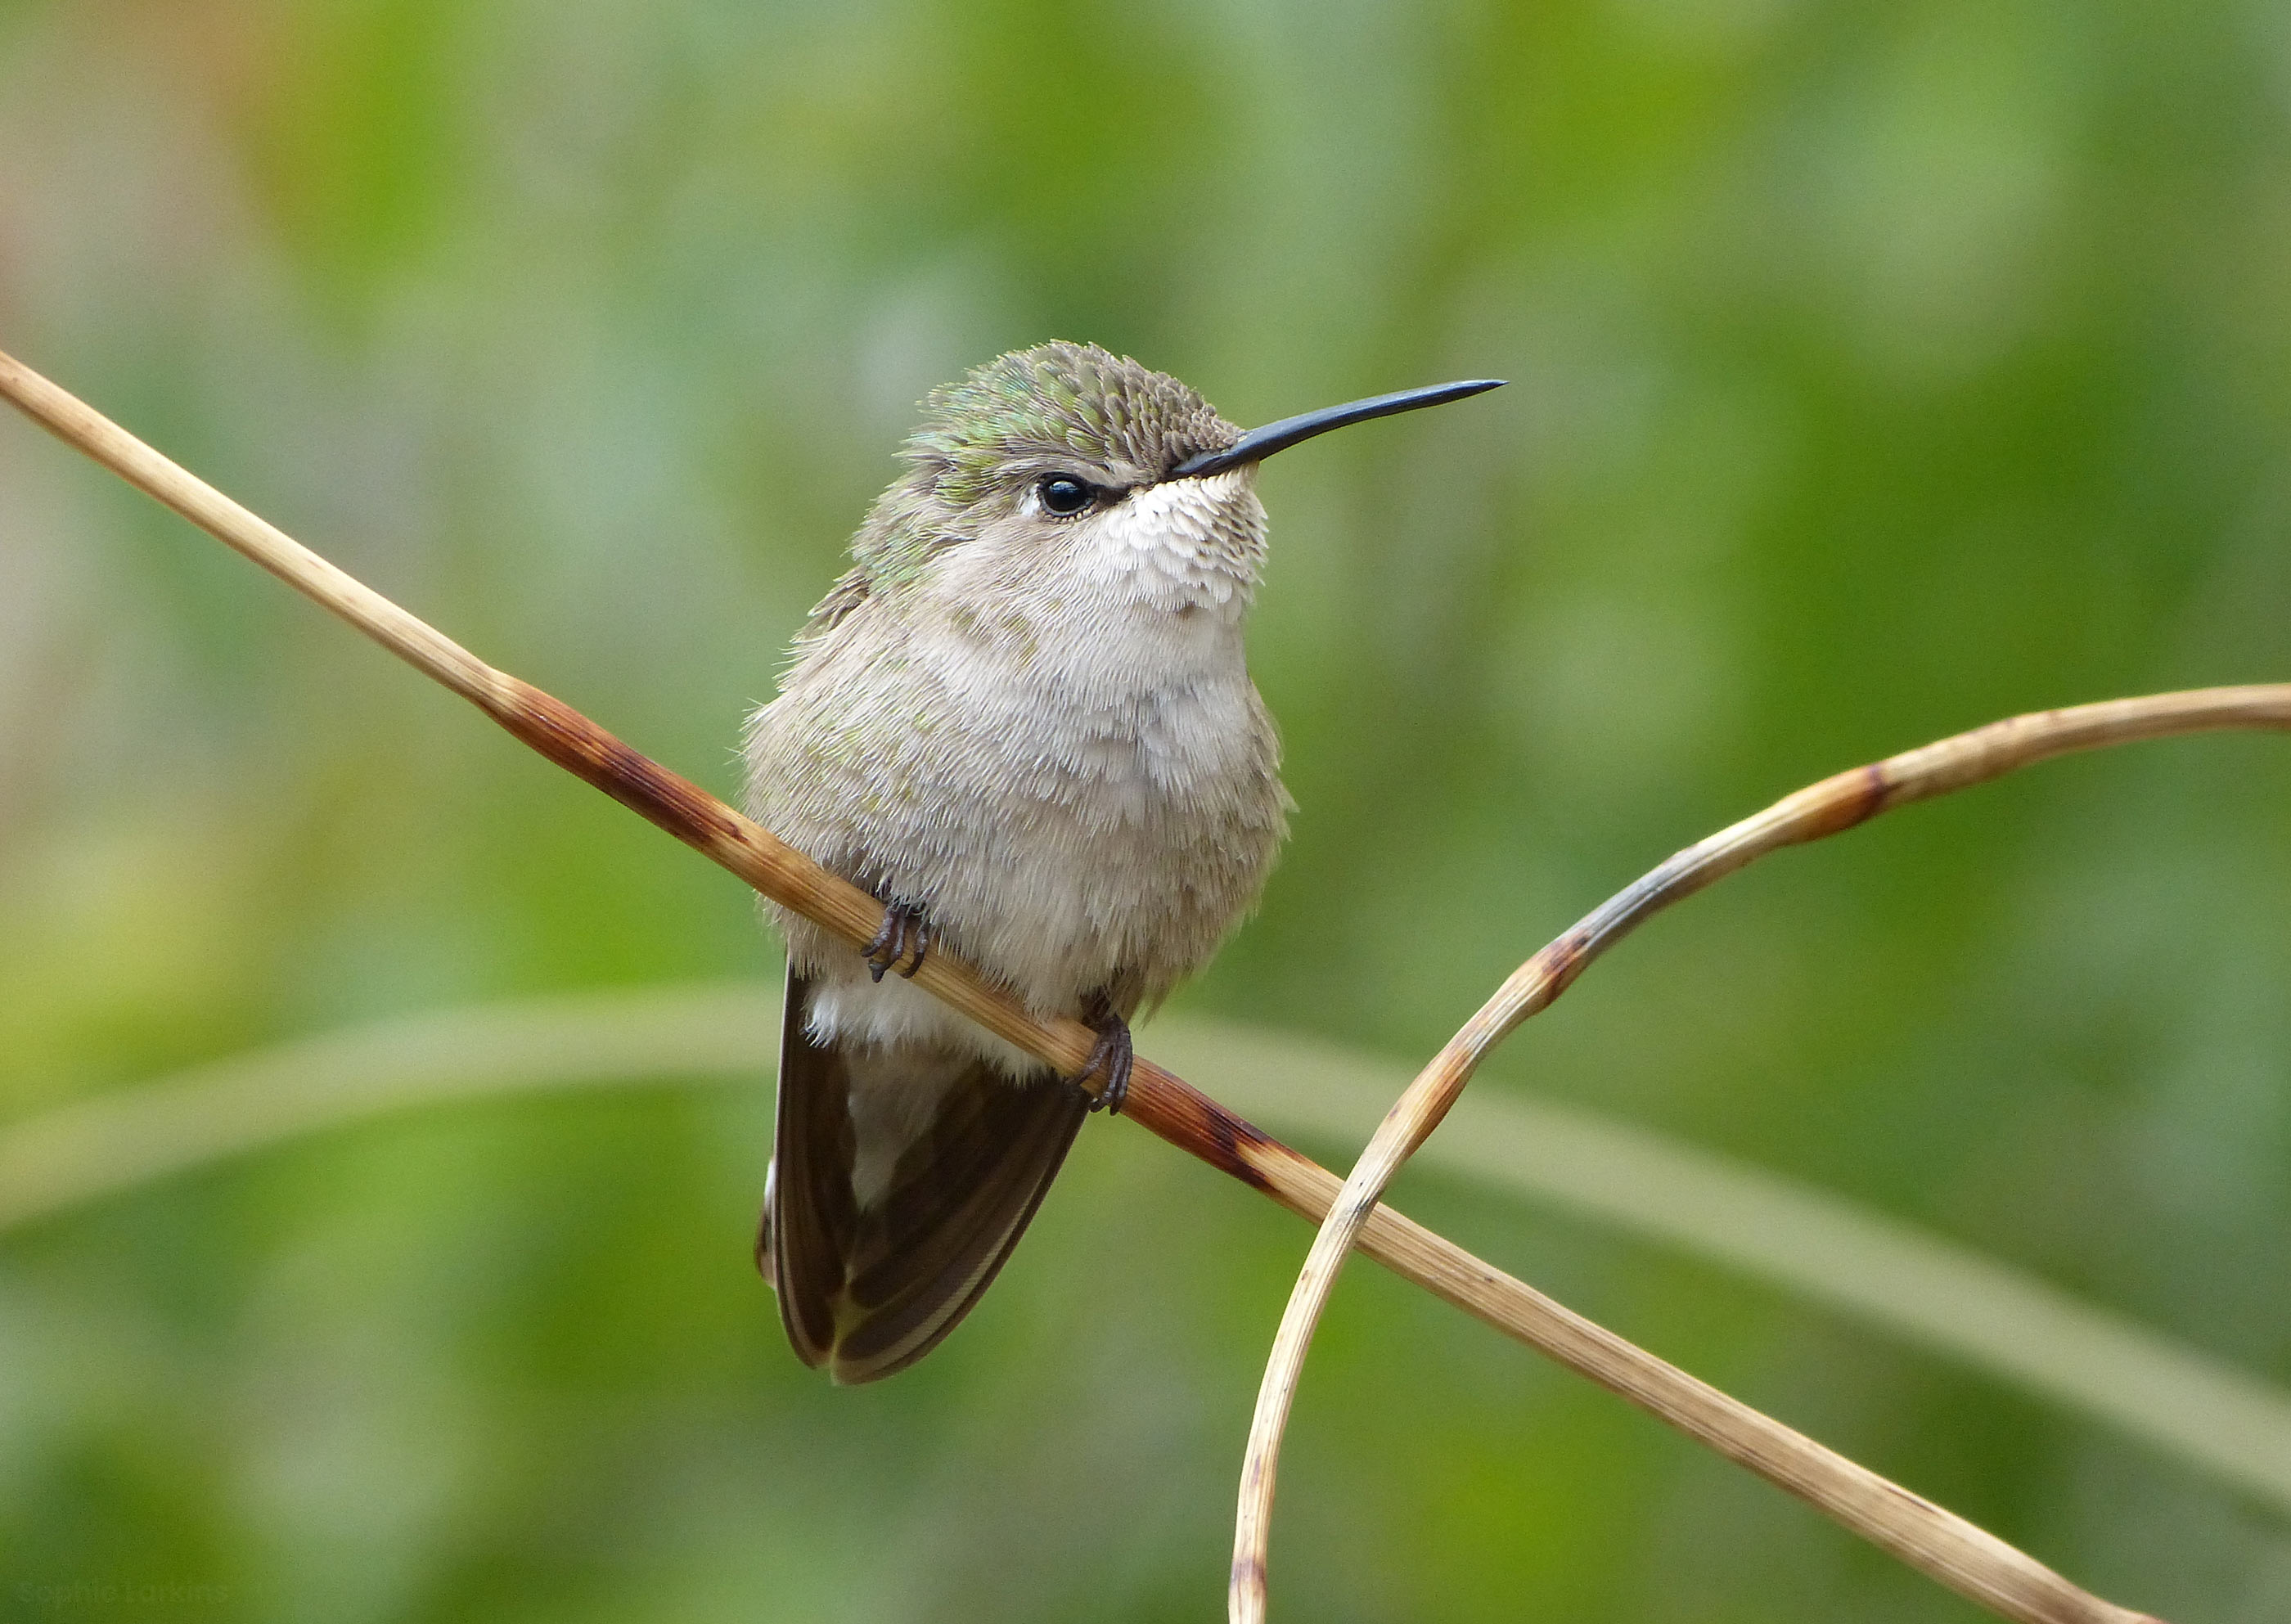 close up photograph of a female Anna's hummingbird perched on a twig